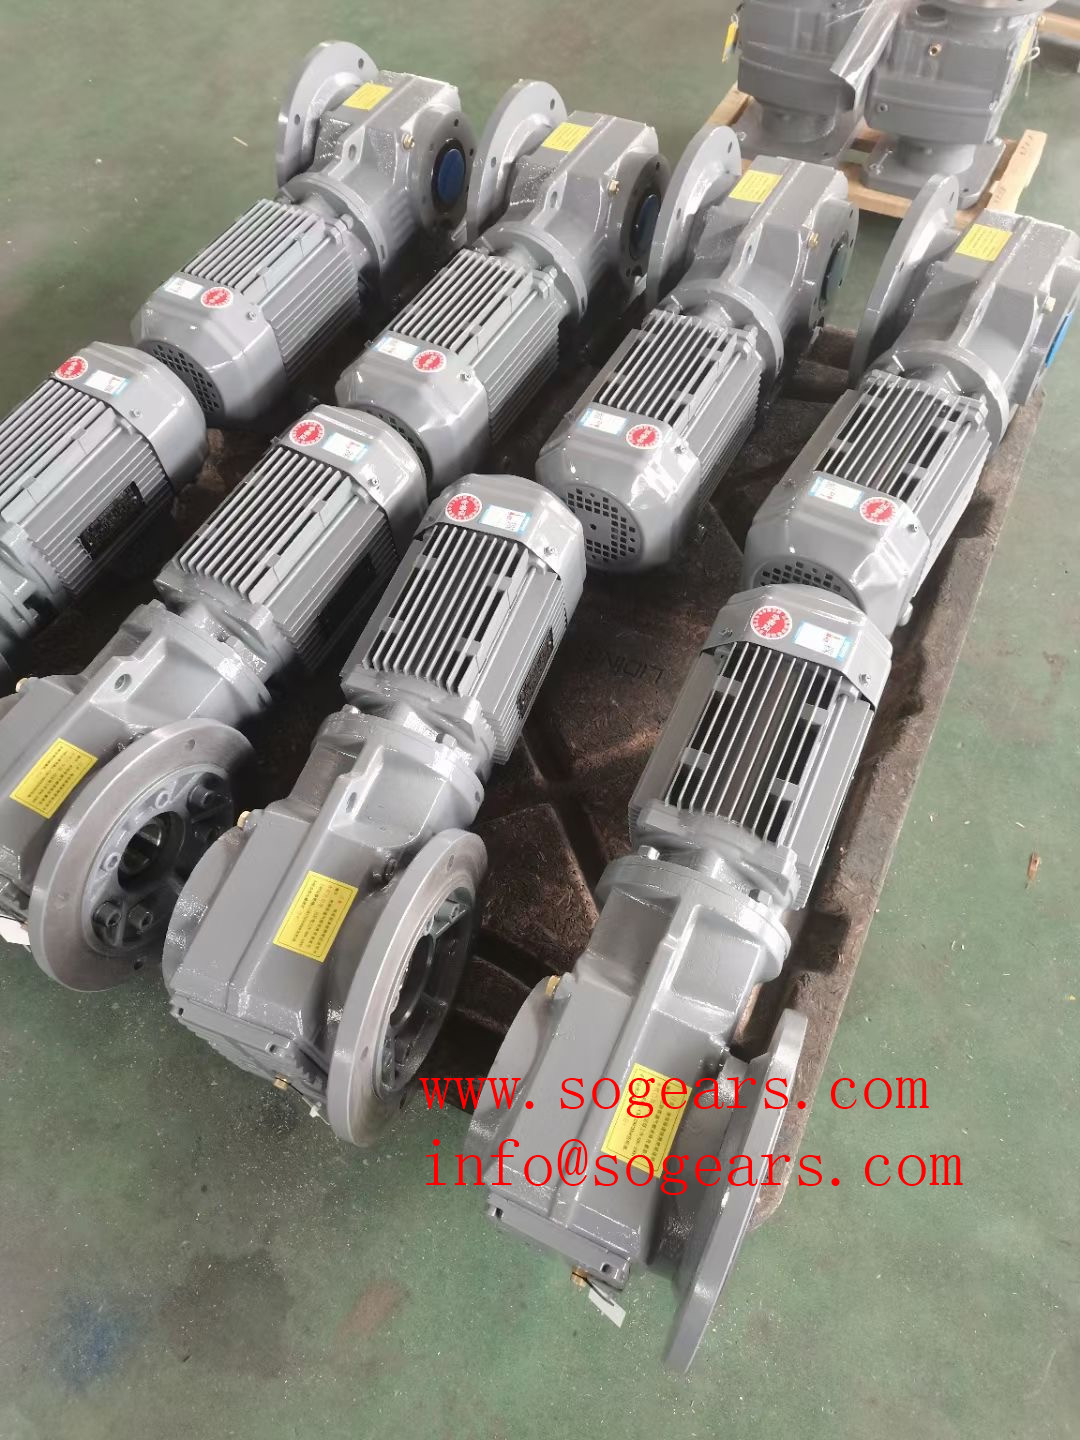 1 HP 3 Phase Motor with gearbox Price